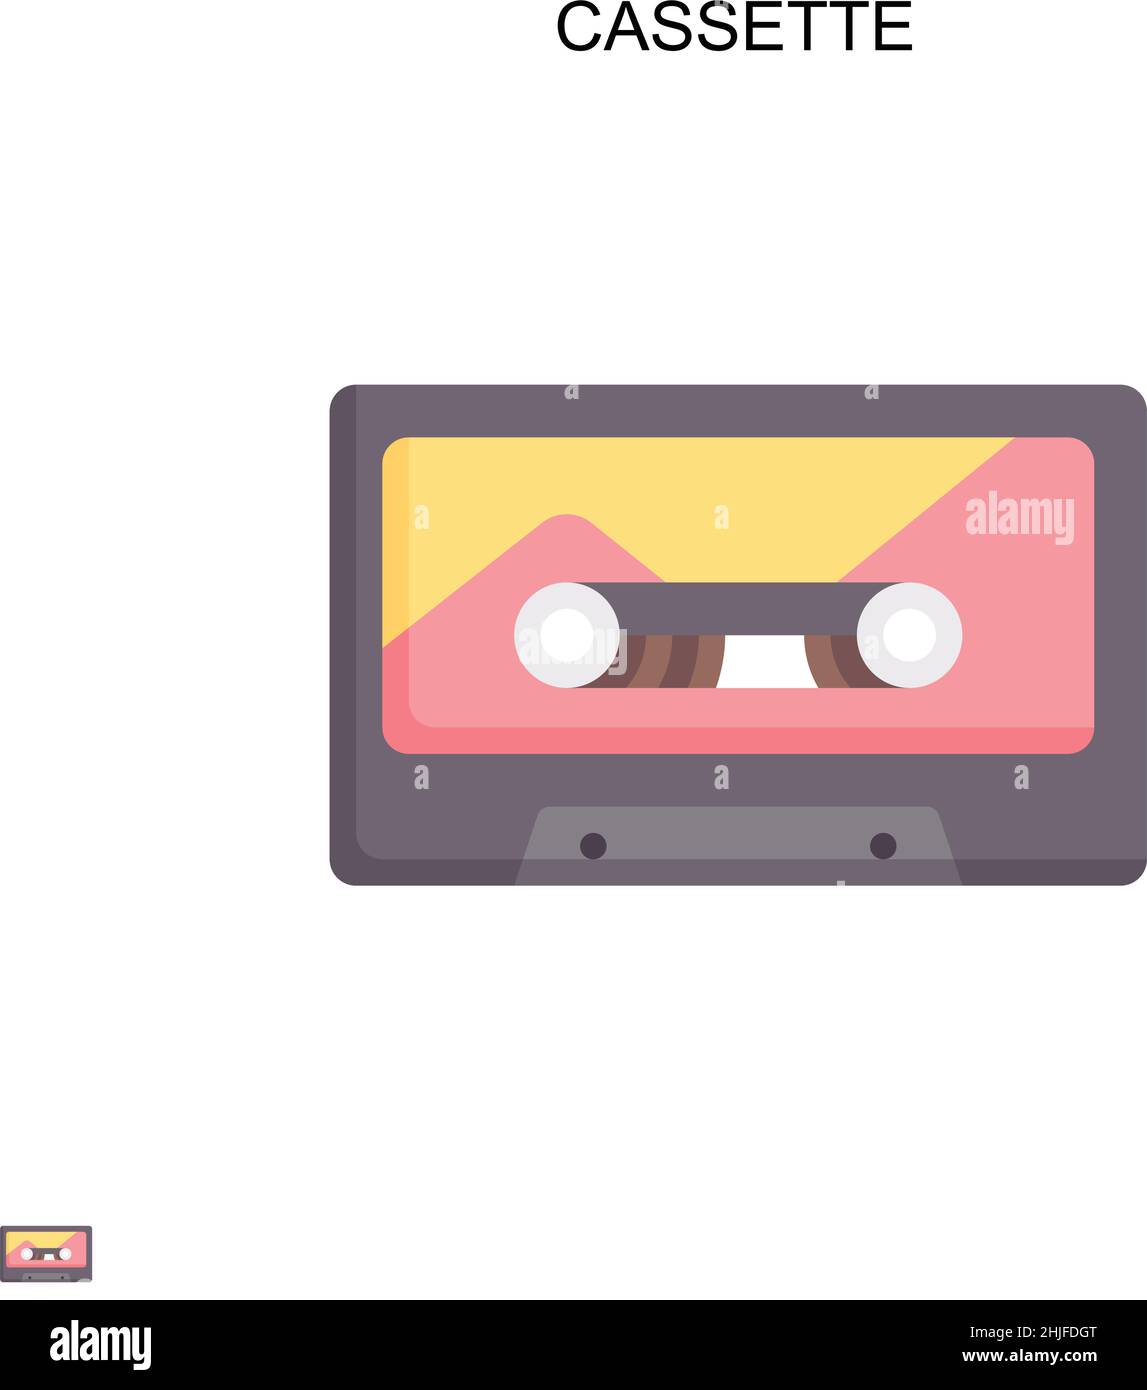 Vintage cassette tape Stock Vector Images - Page 2 - Alamy